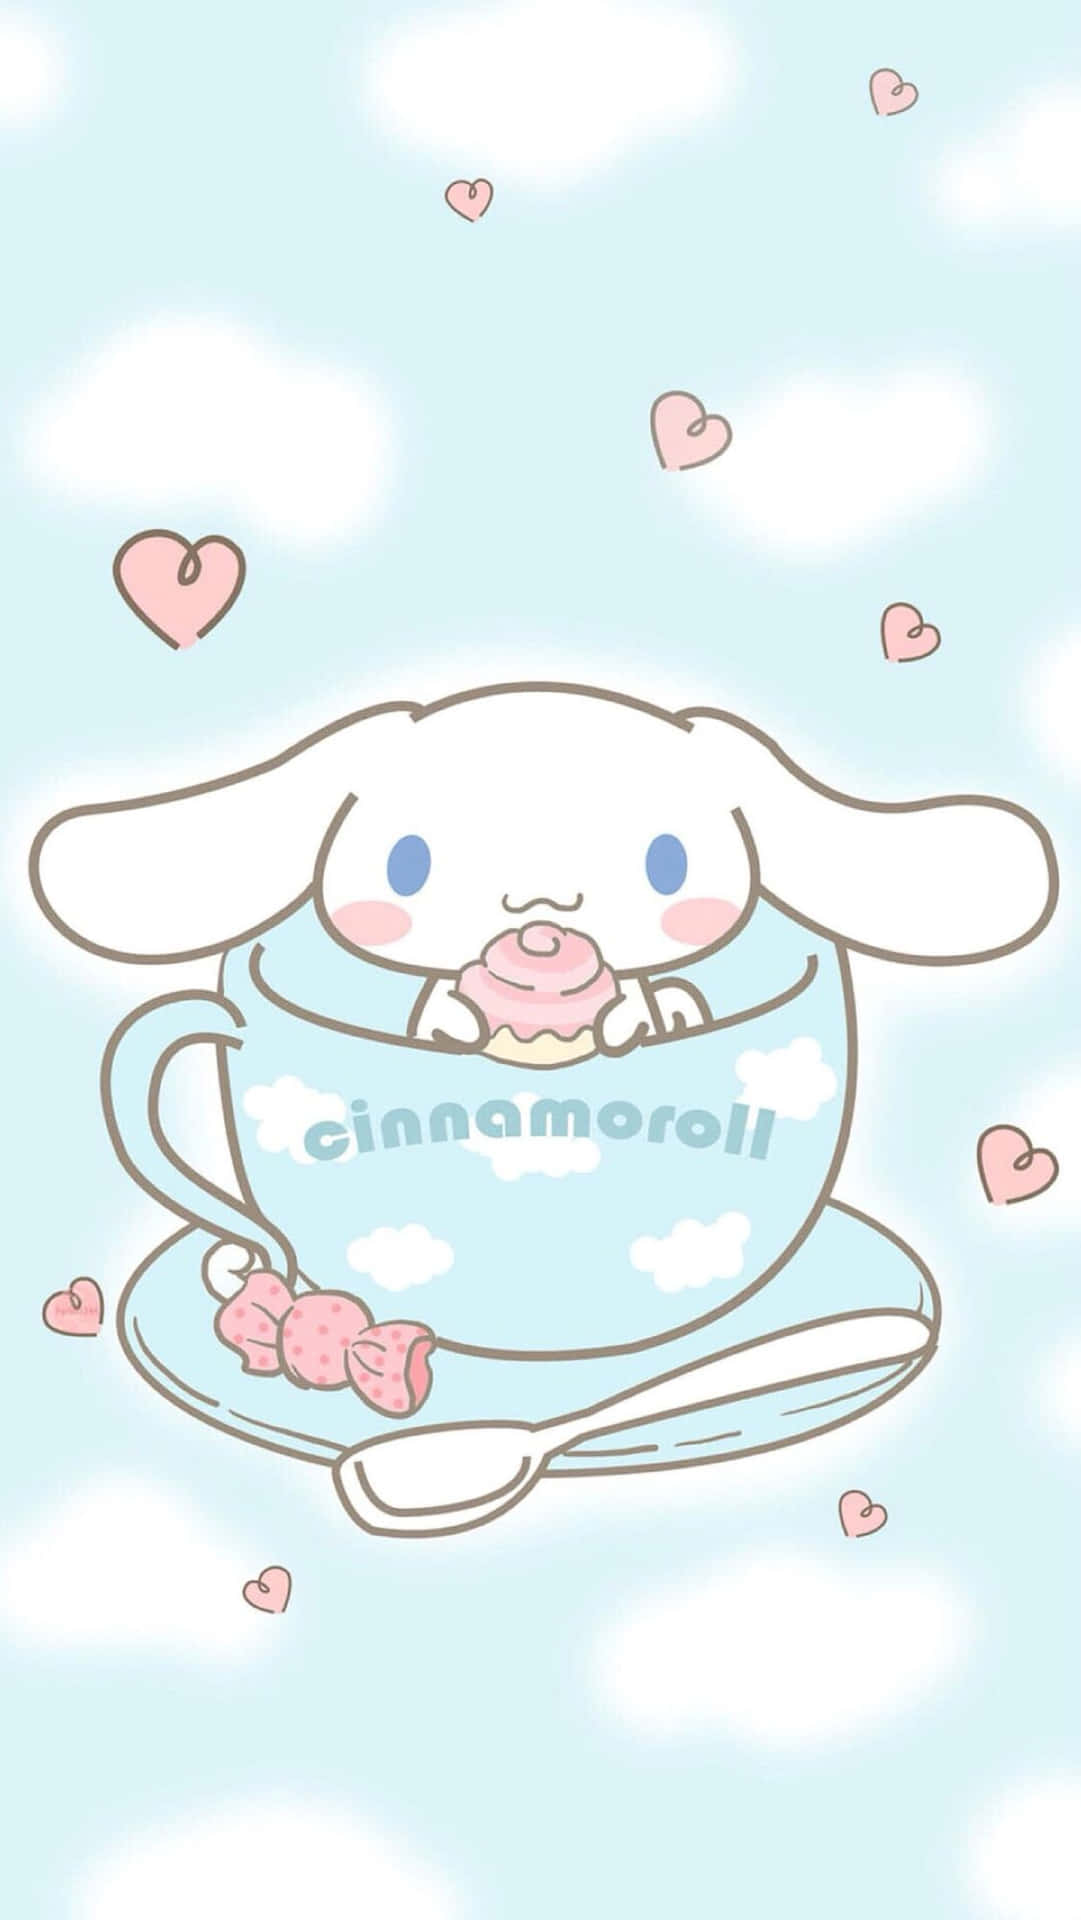 Unleash your cuddly side with this Cinnamoroll Phone Wallpaper